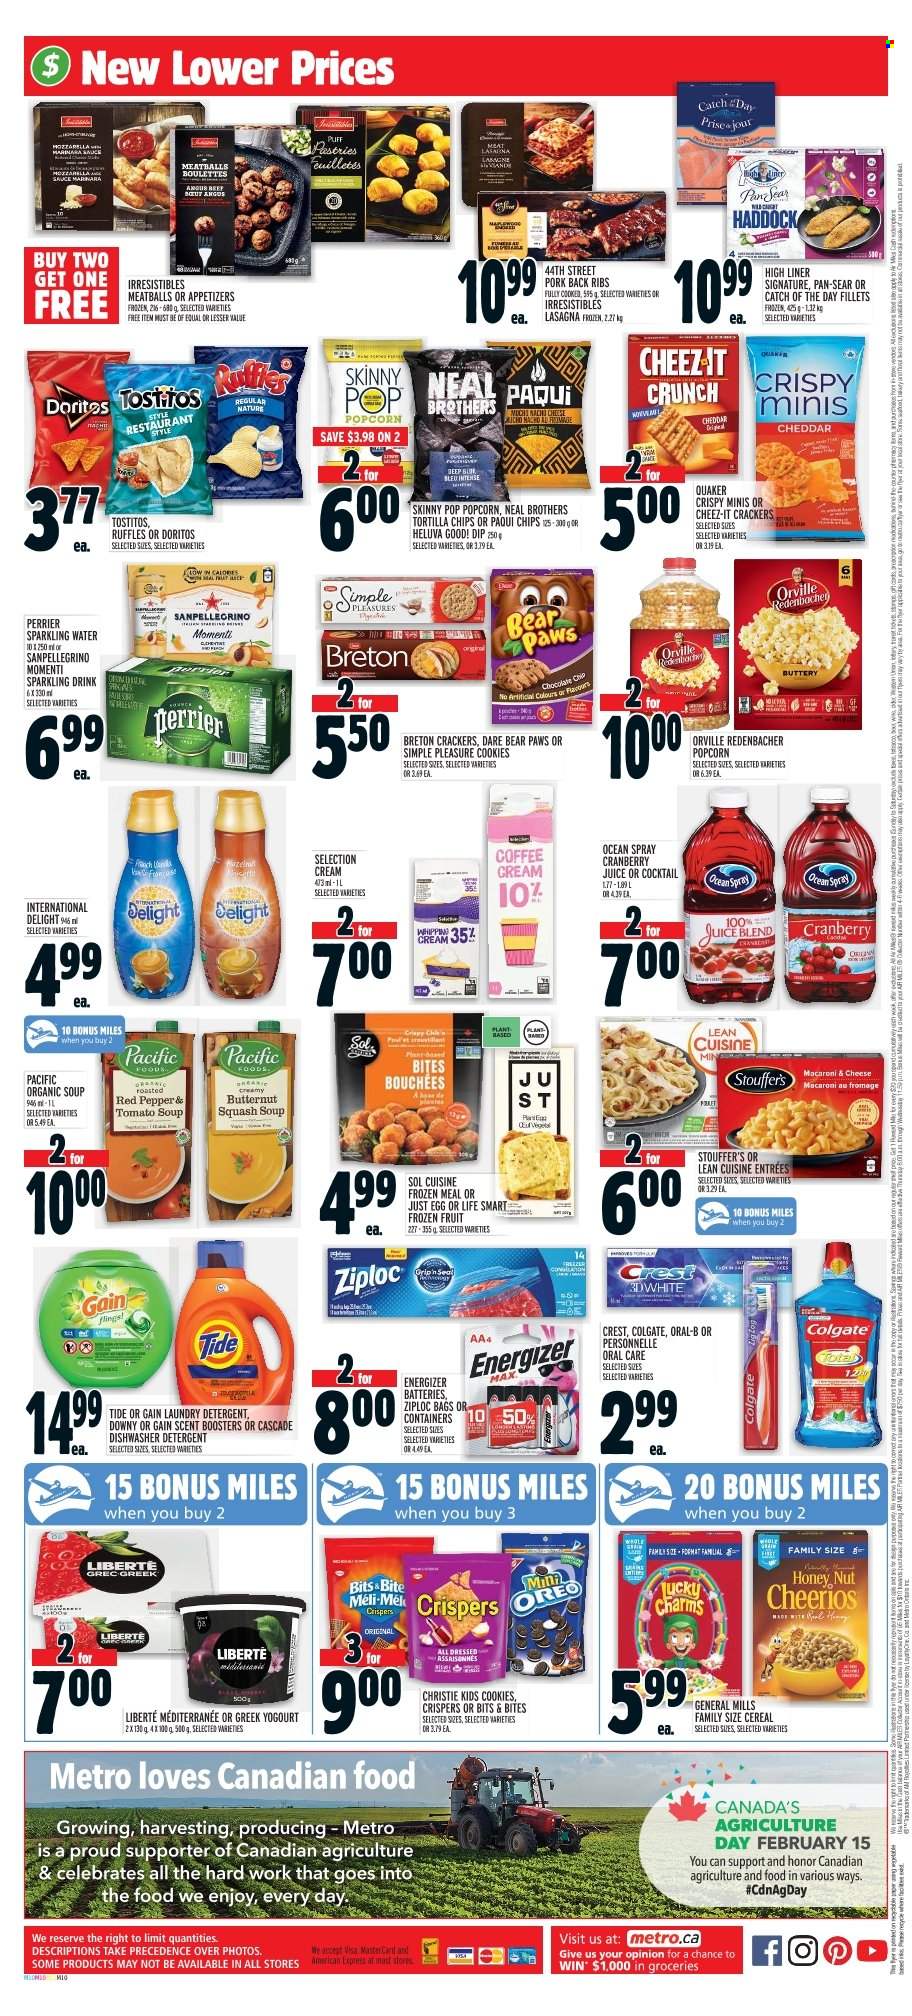 thumbnail - Metro Flyer - February 09, 2023 - February 15, 2023 - Sales products - butternut squash, haddock, macaroni & cheese, tomato soup, meatballs, soup, Quaker, lasagna meal, Lean Cuisine, dip, Stouffer's, cookies, crackers, Doritos, tortilla chips, popcorn, Cheez-It, Ruffles, Tostitos, Skinny Pop, cereals, Cheerios, cranberry juice, juice, Perrier, sparkling water, BROTHERS, ribs, pork meat, pork ribs, pork back ribs, Gain, Tide, laundry detergent, Cascade, scent booster, Crest, bag, Ziploc, pan, battery, Paws, detergent, Energizer, Colgate, Oreo, Oral-B. Page 2.